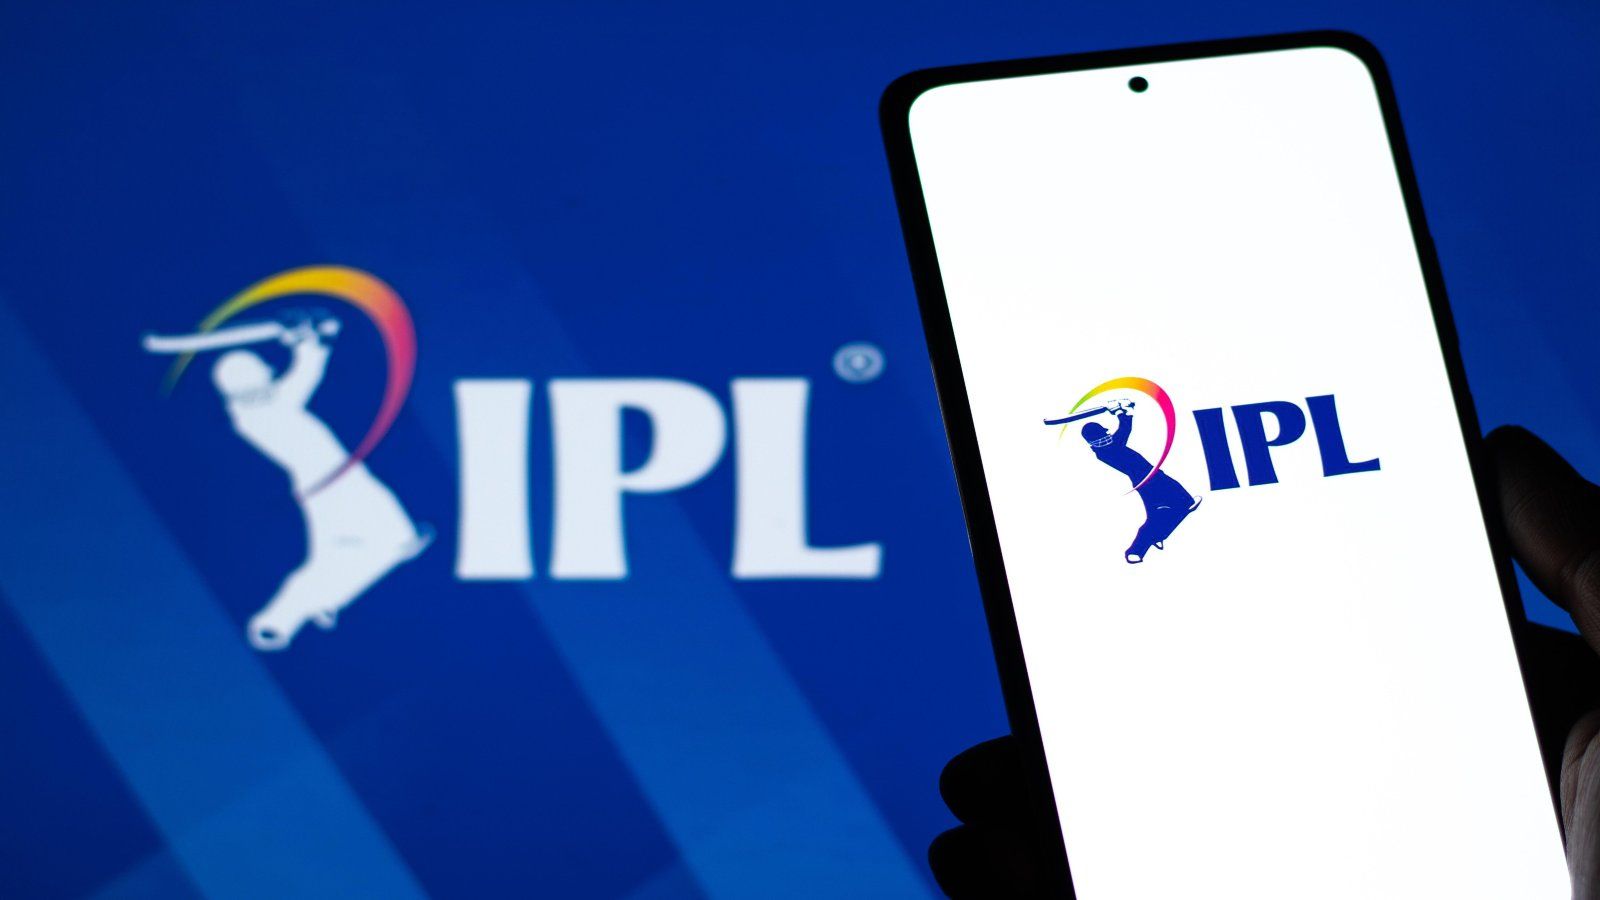 Rajabets IPL Betting Offers & Free Bets for Lucknow Super Giants vs Mumbai Indians